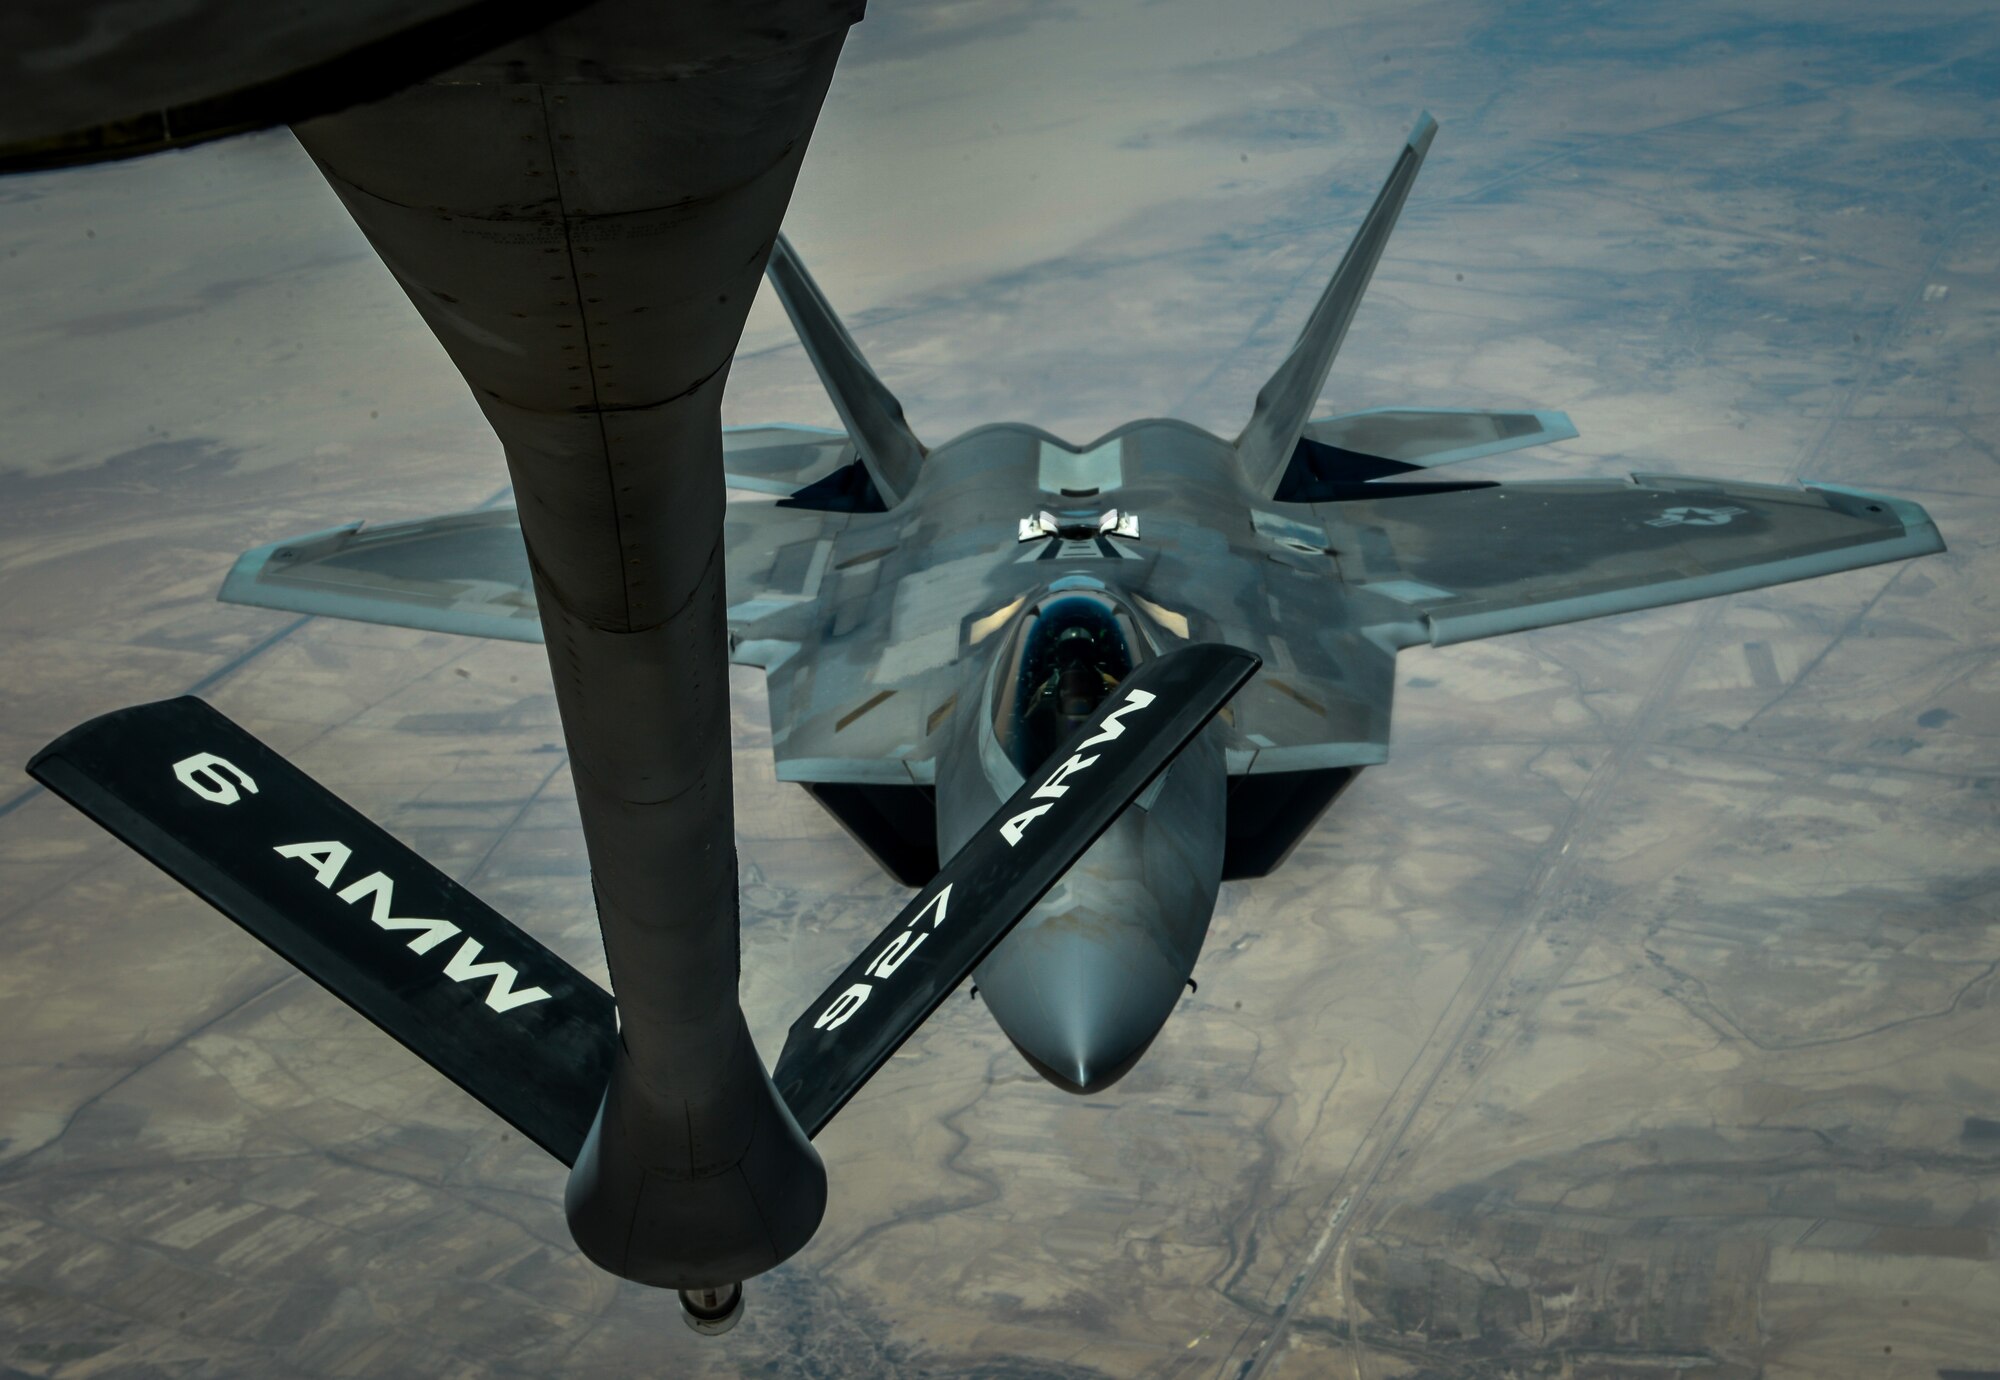 An F-22 Raptor prepares to receive fuel from a KC-135 Stratotanker assigned to the 340th Expeditionary Air Refueling Squadron during a mission in support of Operation Inherent Resolve, June 20, 2017. The F-22 is a component of the Global Strike Task Force, supporting U.S. and coalition forces working to liberate territory and people under the control of ISIS. (U.S. Air Force photo by Staff Sgt. Michael Battles) 